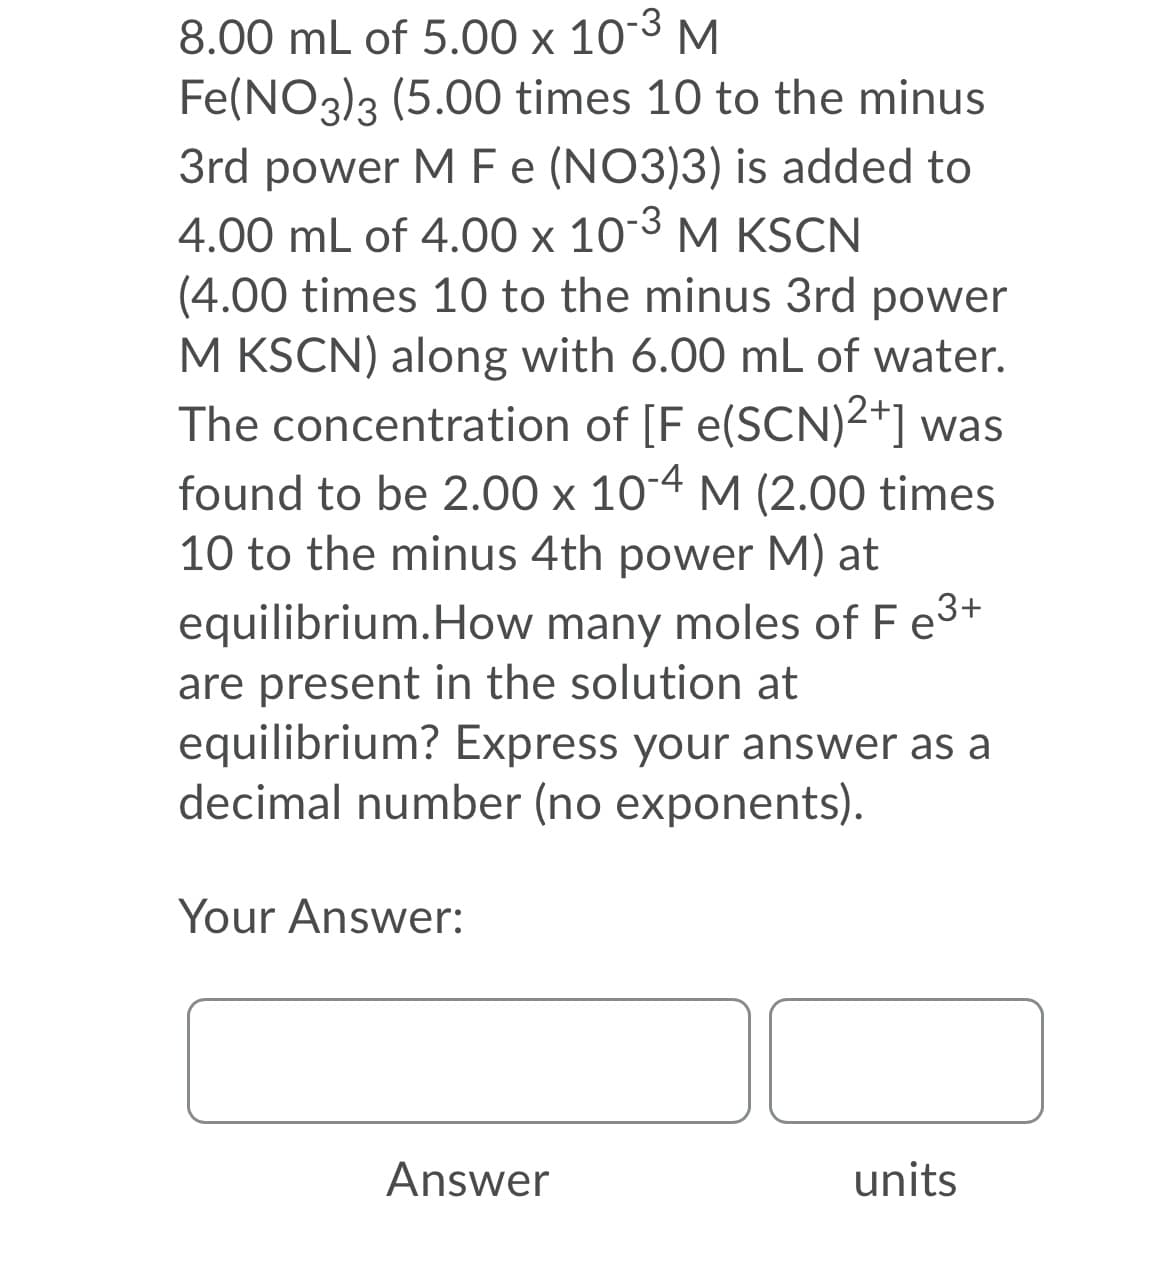 8.00 mL of 5.00 x 10³ M
Fe(NO3)3 (5.00 times 10 to the minus
3rd power MFe (NO3)3) is added to
4.00 mL of 4.00 x 103 M KSCN
(4.00 times 10 to the minus 3rd power
M KSCN) along with 6.00 mL of water.
The concentration of [F e(SCN)2+] was
found to be 2.00 x 10-4 M (2.00 times
10 to the minus 4th power M) at
equilibrium.How many moles of F e3+
are present in the solution at
equilibrium? Express your answer as a
decimal number (no exponents).
Your Answer:
Answer
units
